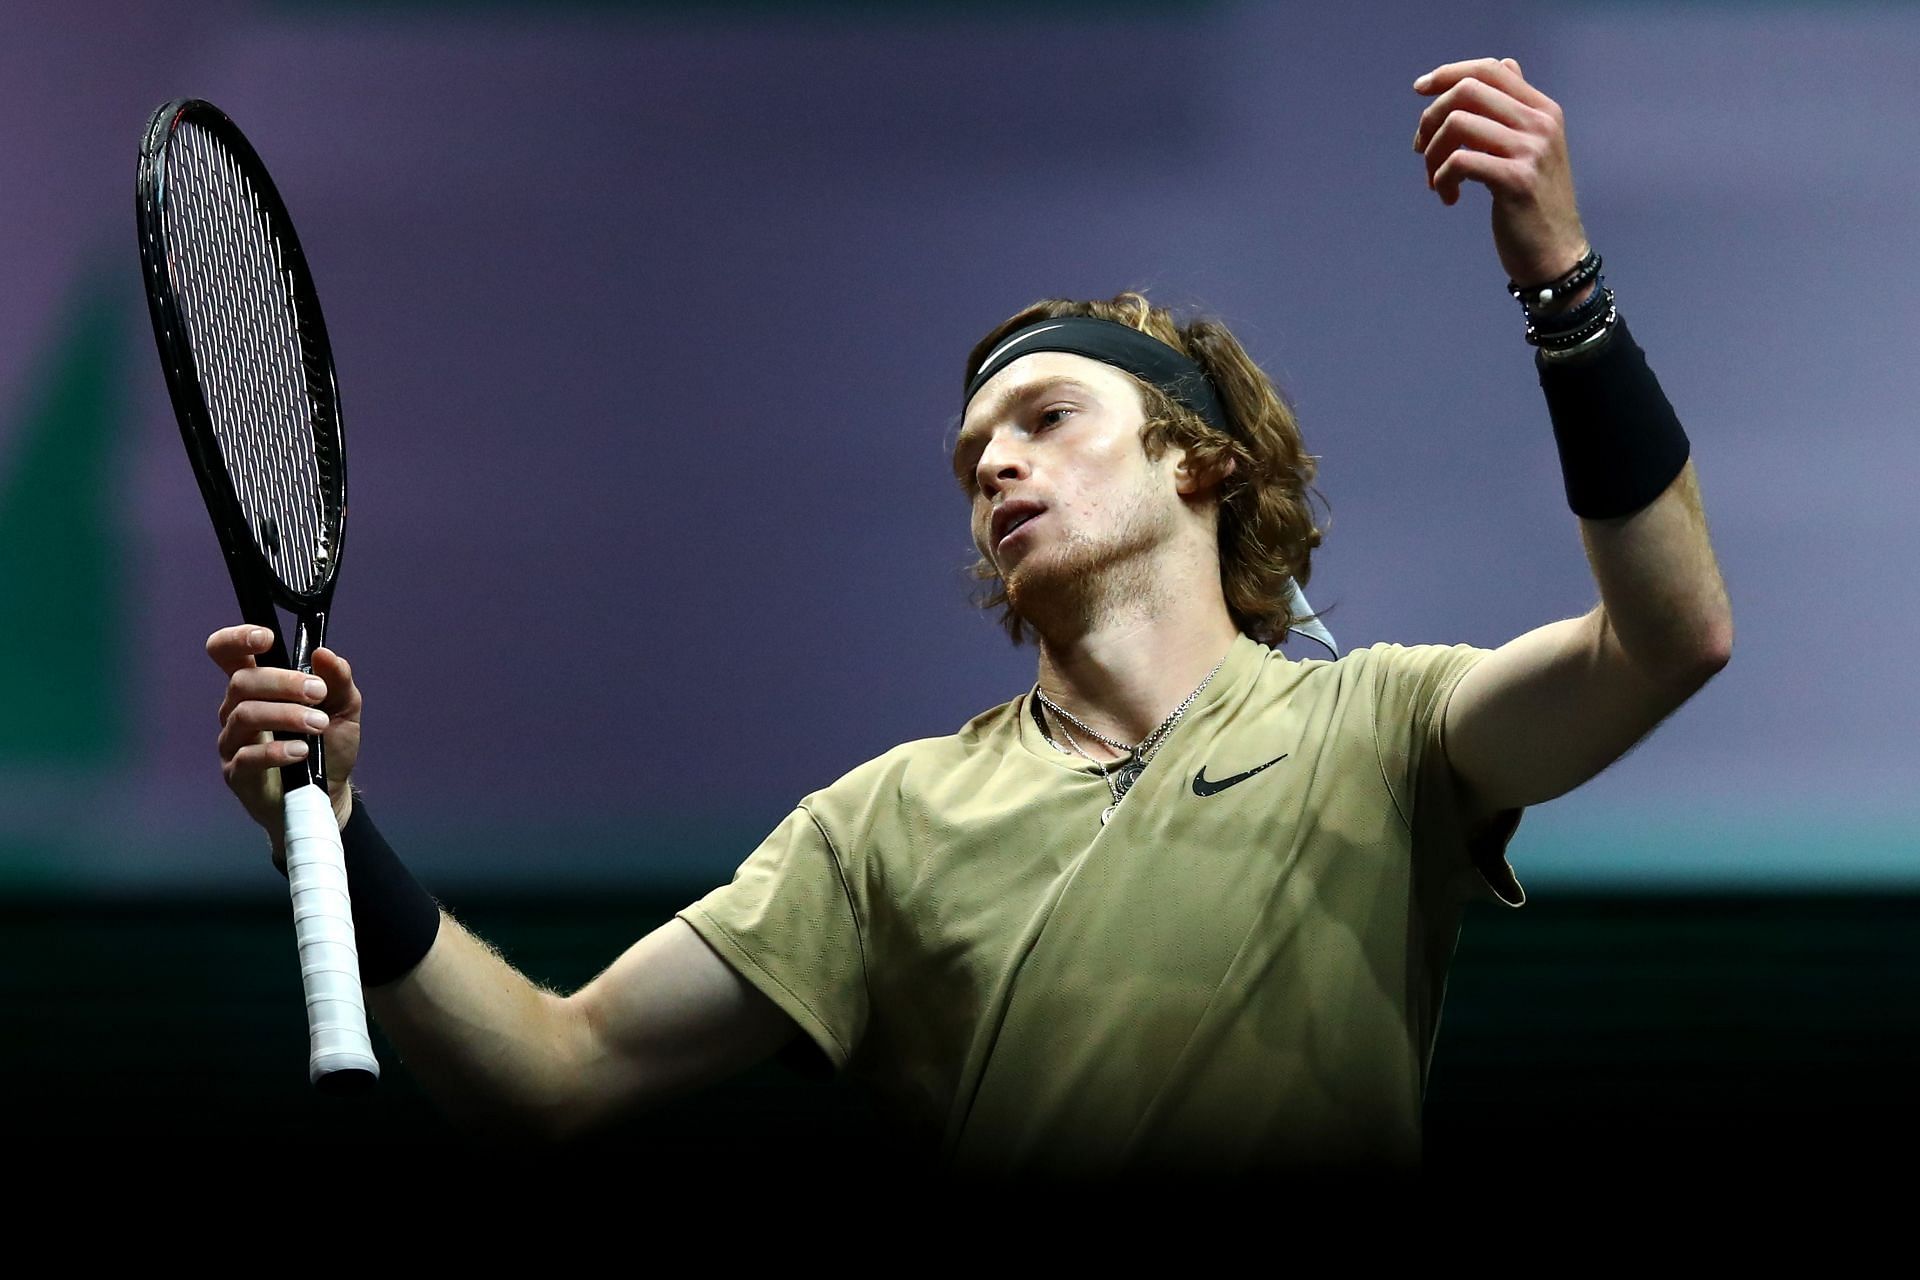 Andrey Rublev has reached the quarter-final stage at his last 11 ATP 500 tournaments